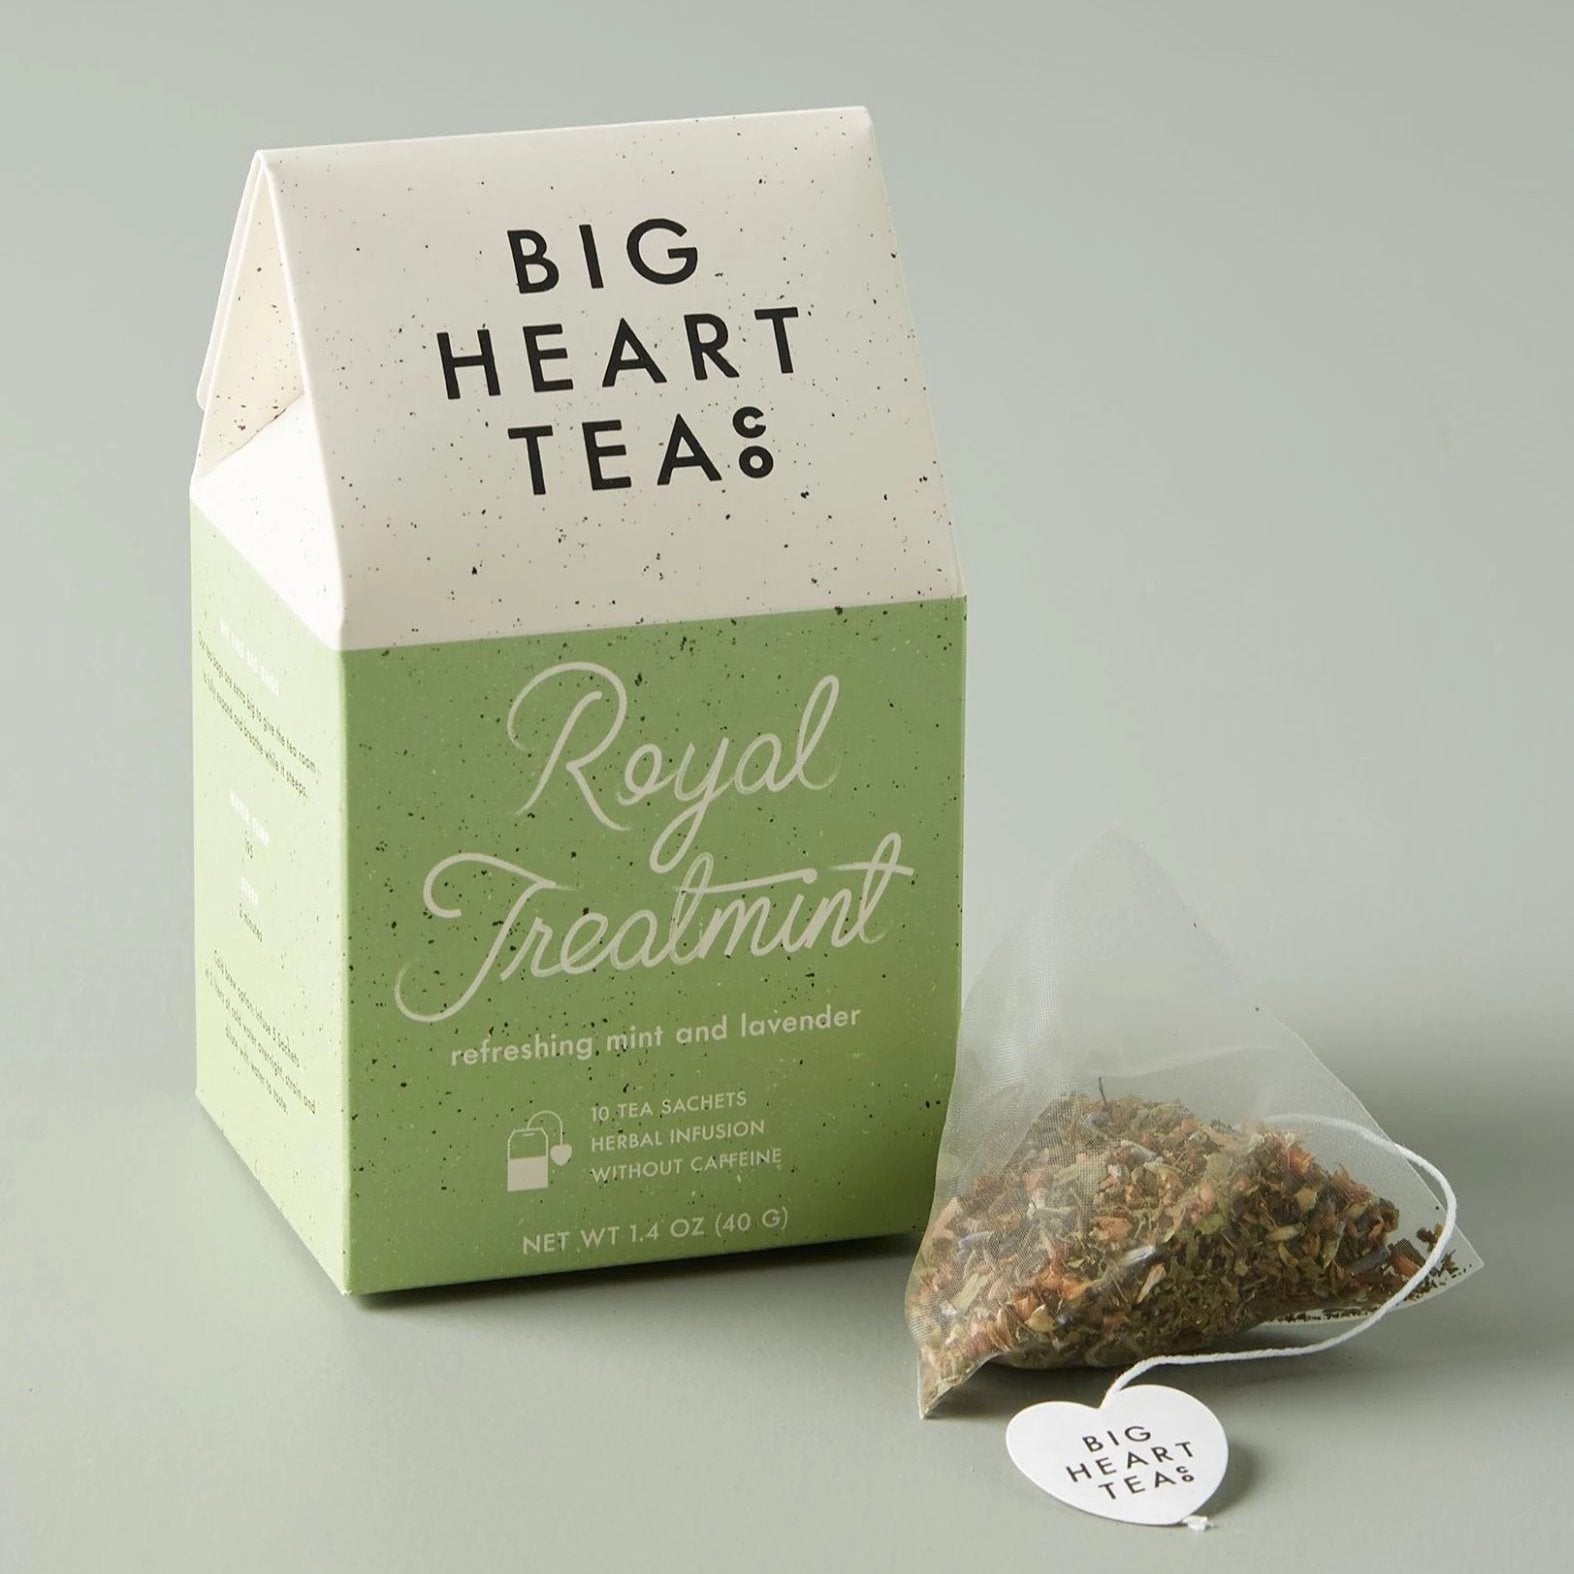 House-shaped tea box in green with a tea sachet outside and to the right of the box.